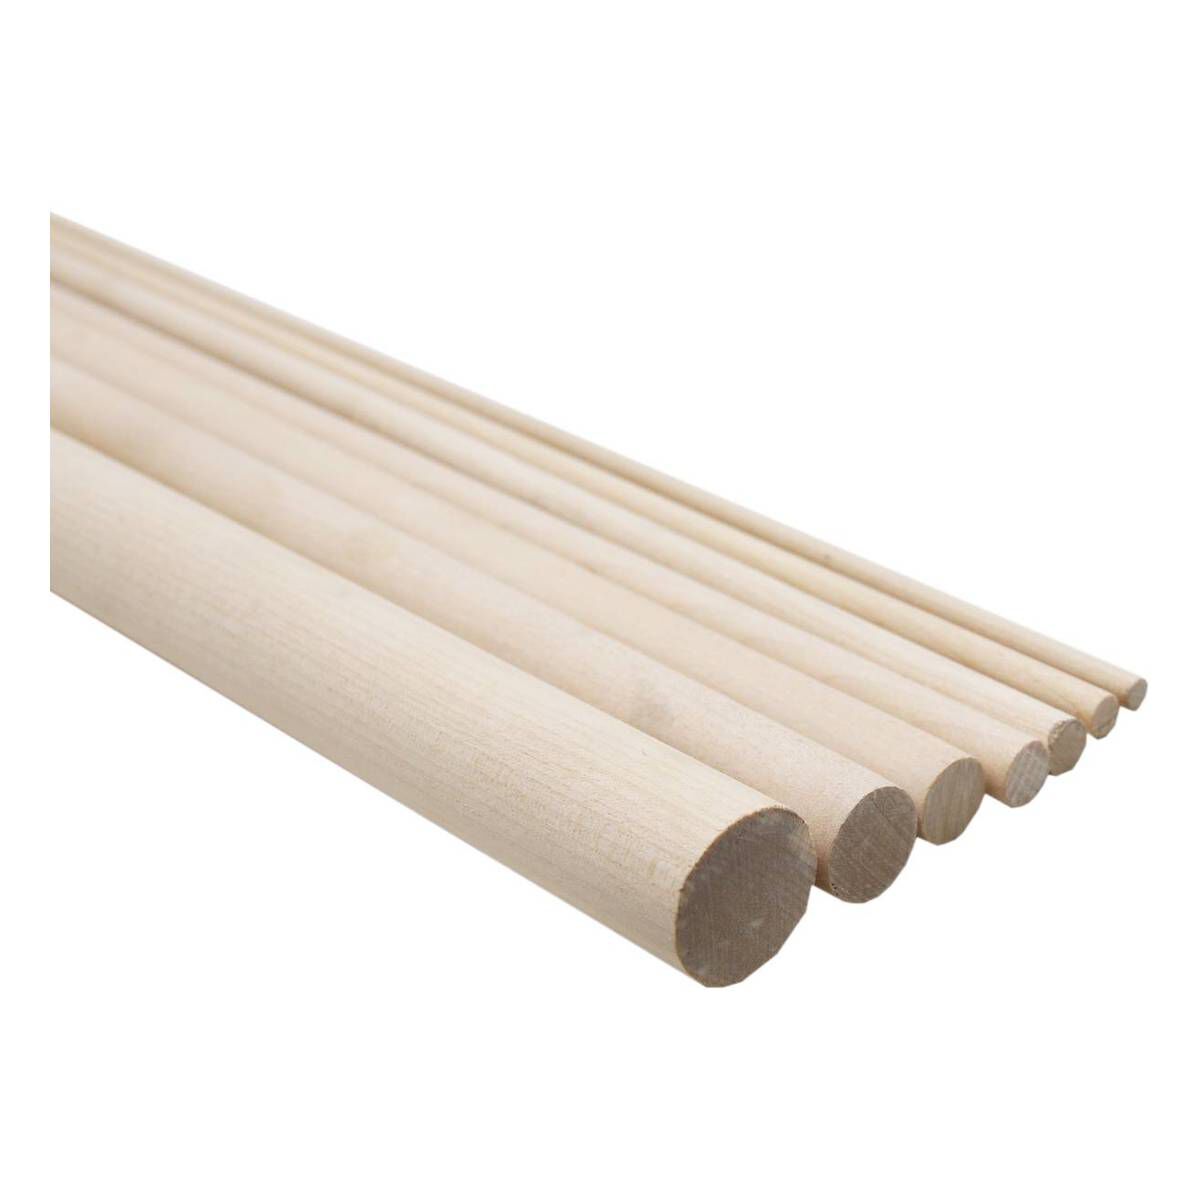 Dollhouse Miniature Hardwood Dowels 10 Pack by Midwest Products 1/16 Diameter 